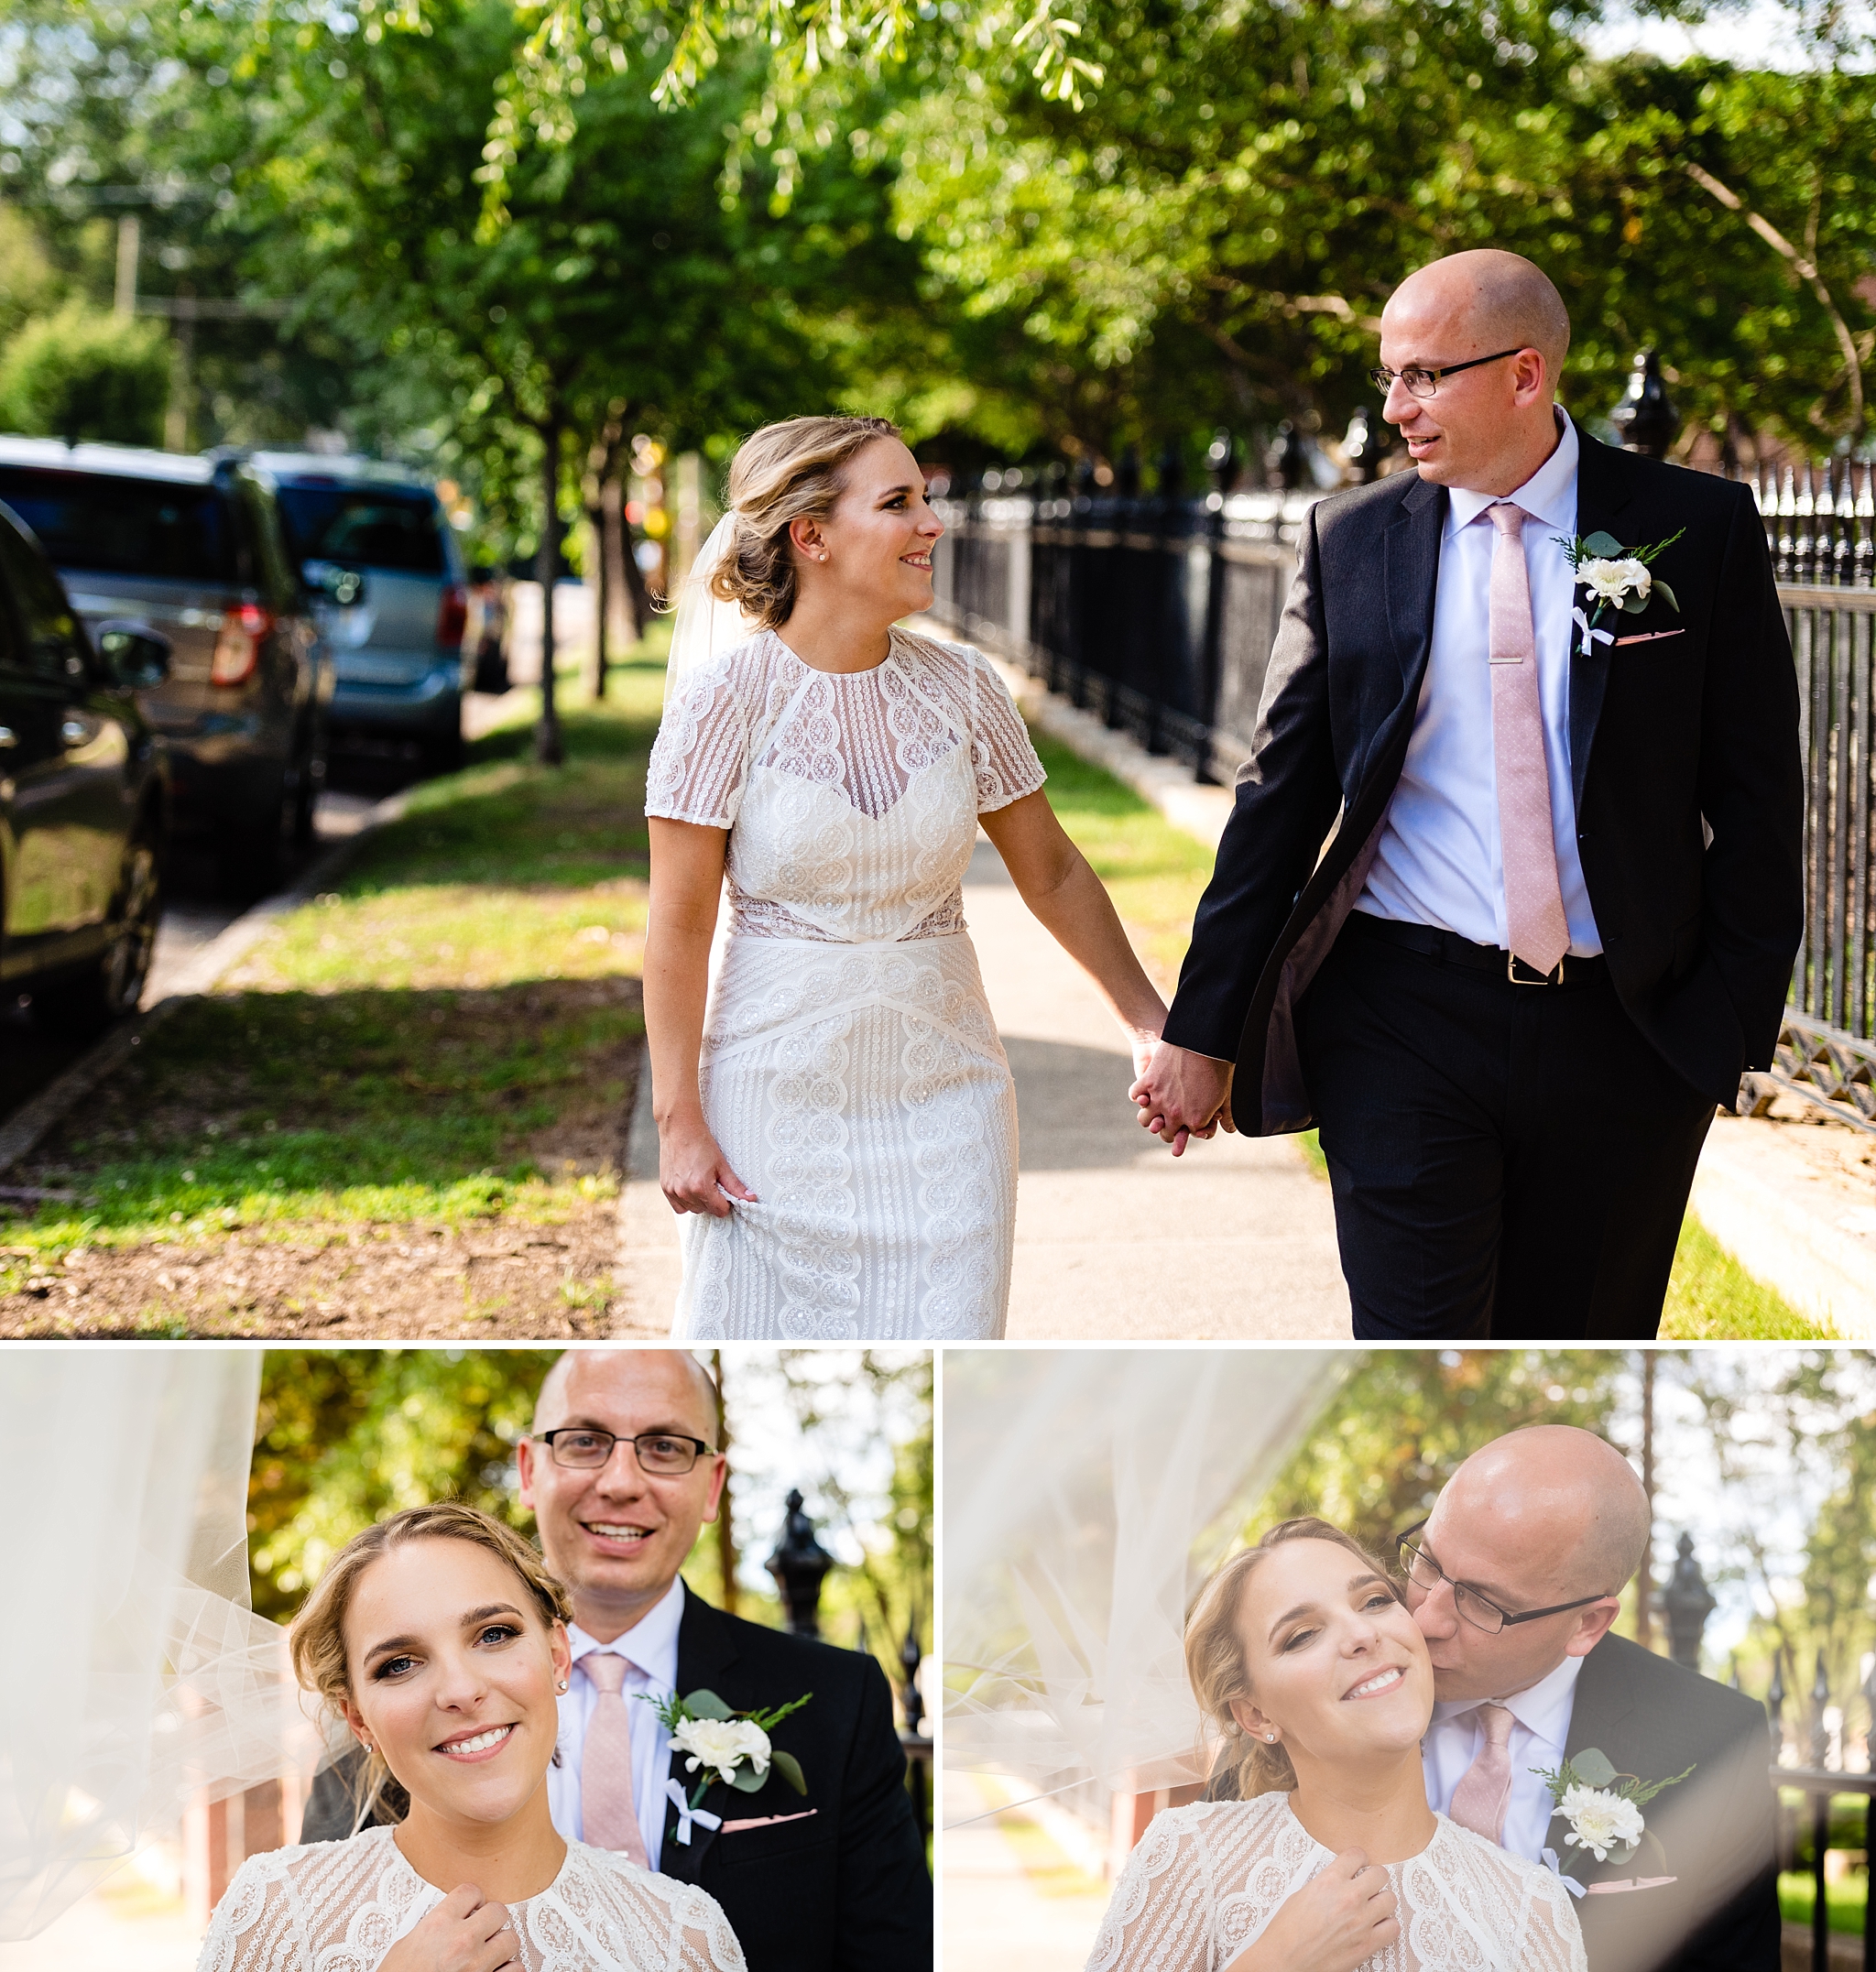 Portraits of a bride and groom at their All Saints Chapel Wedding by Raleigh wedding photographers